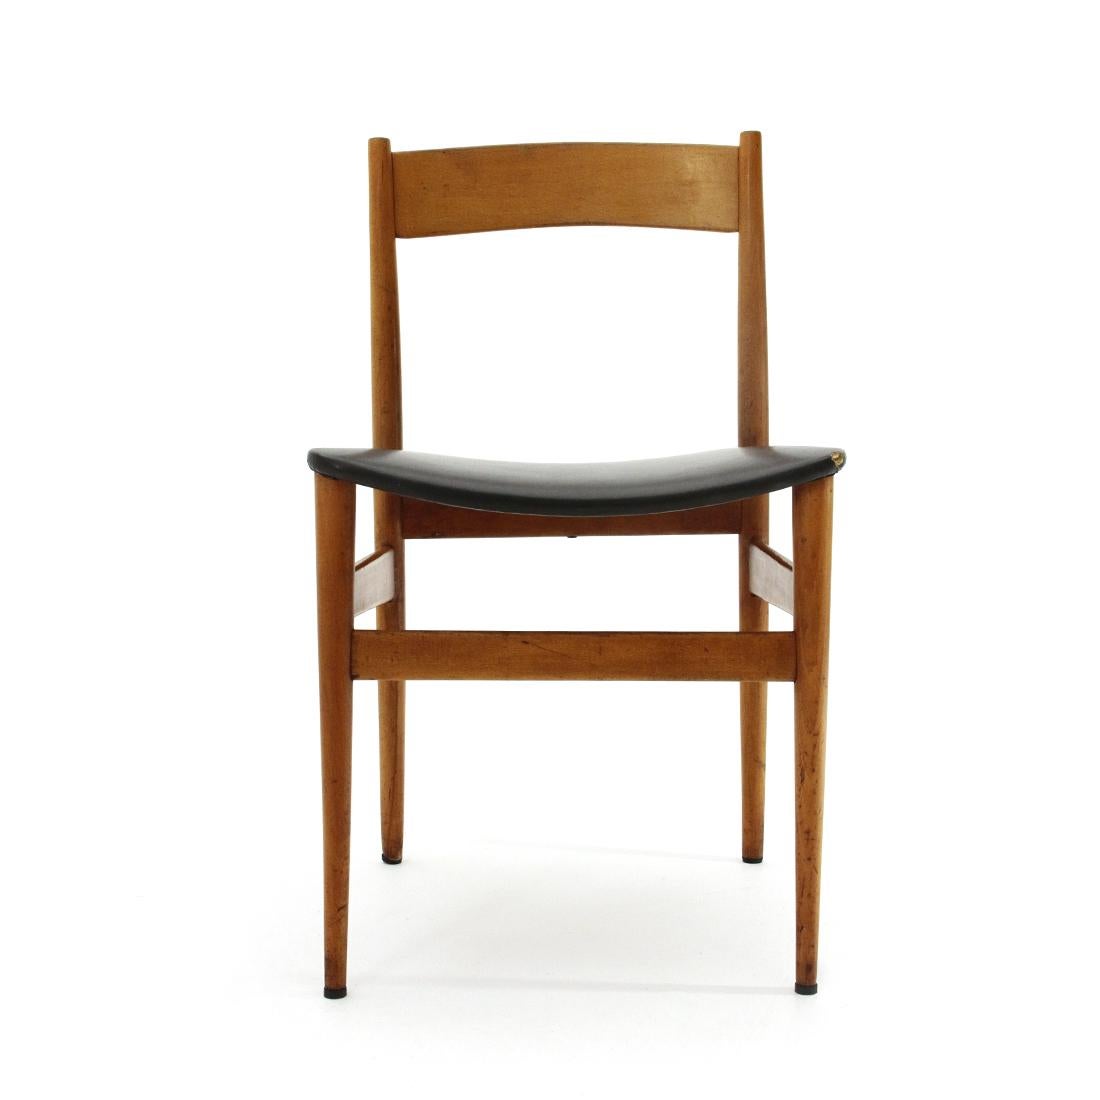 Italian Wooden Chair with Upholstered Seat, 1950s For Sale